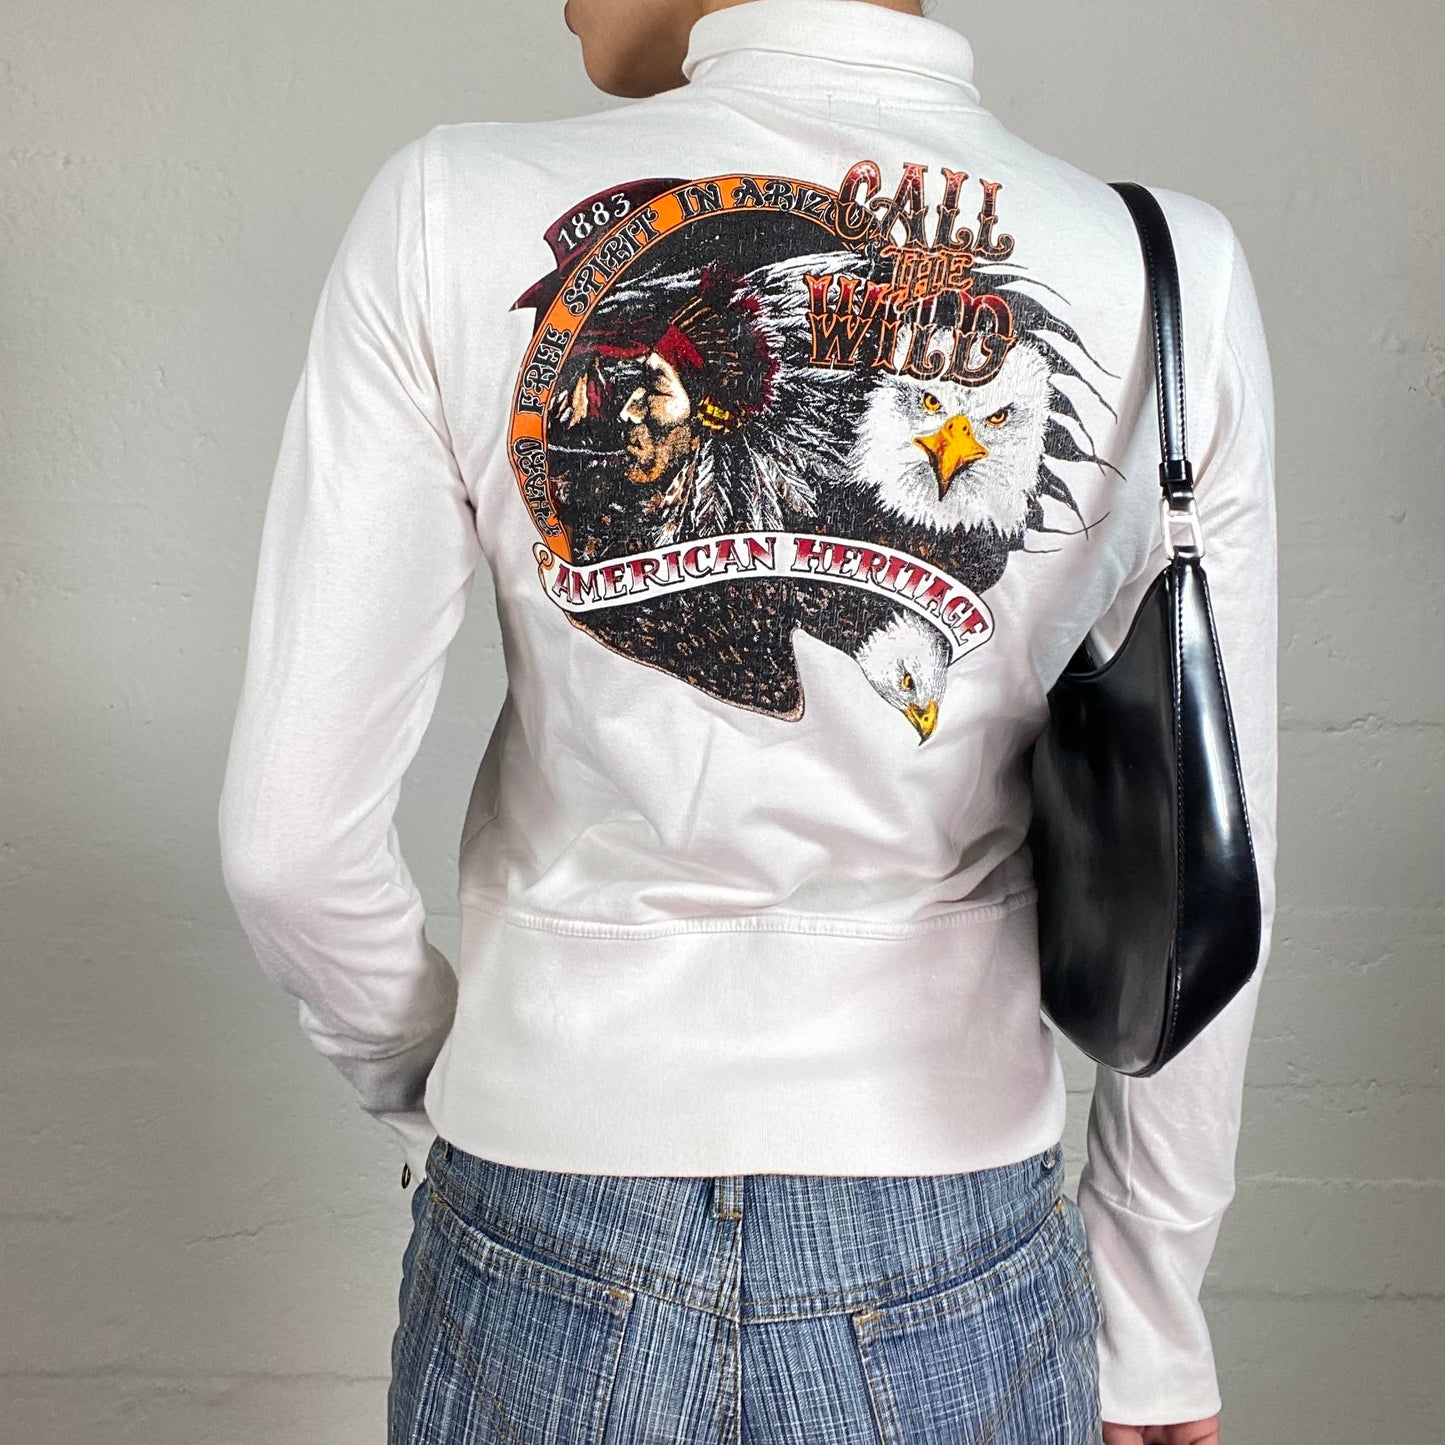 Vintage 2000's Grunge White Zip Up Pullover with Gold No Stealing Freedom and Biker Vibe Illustration Prints (M)